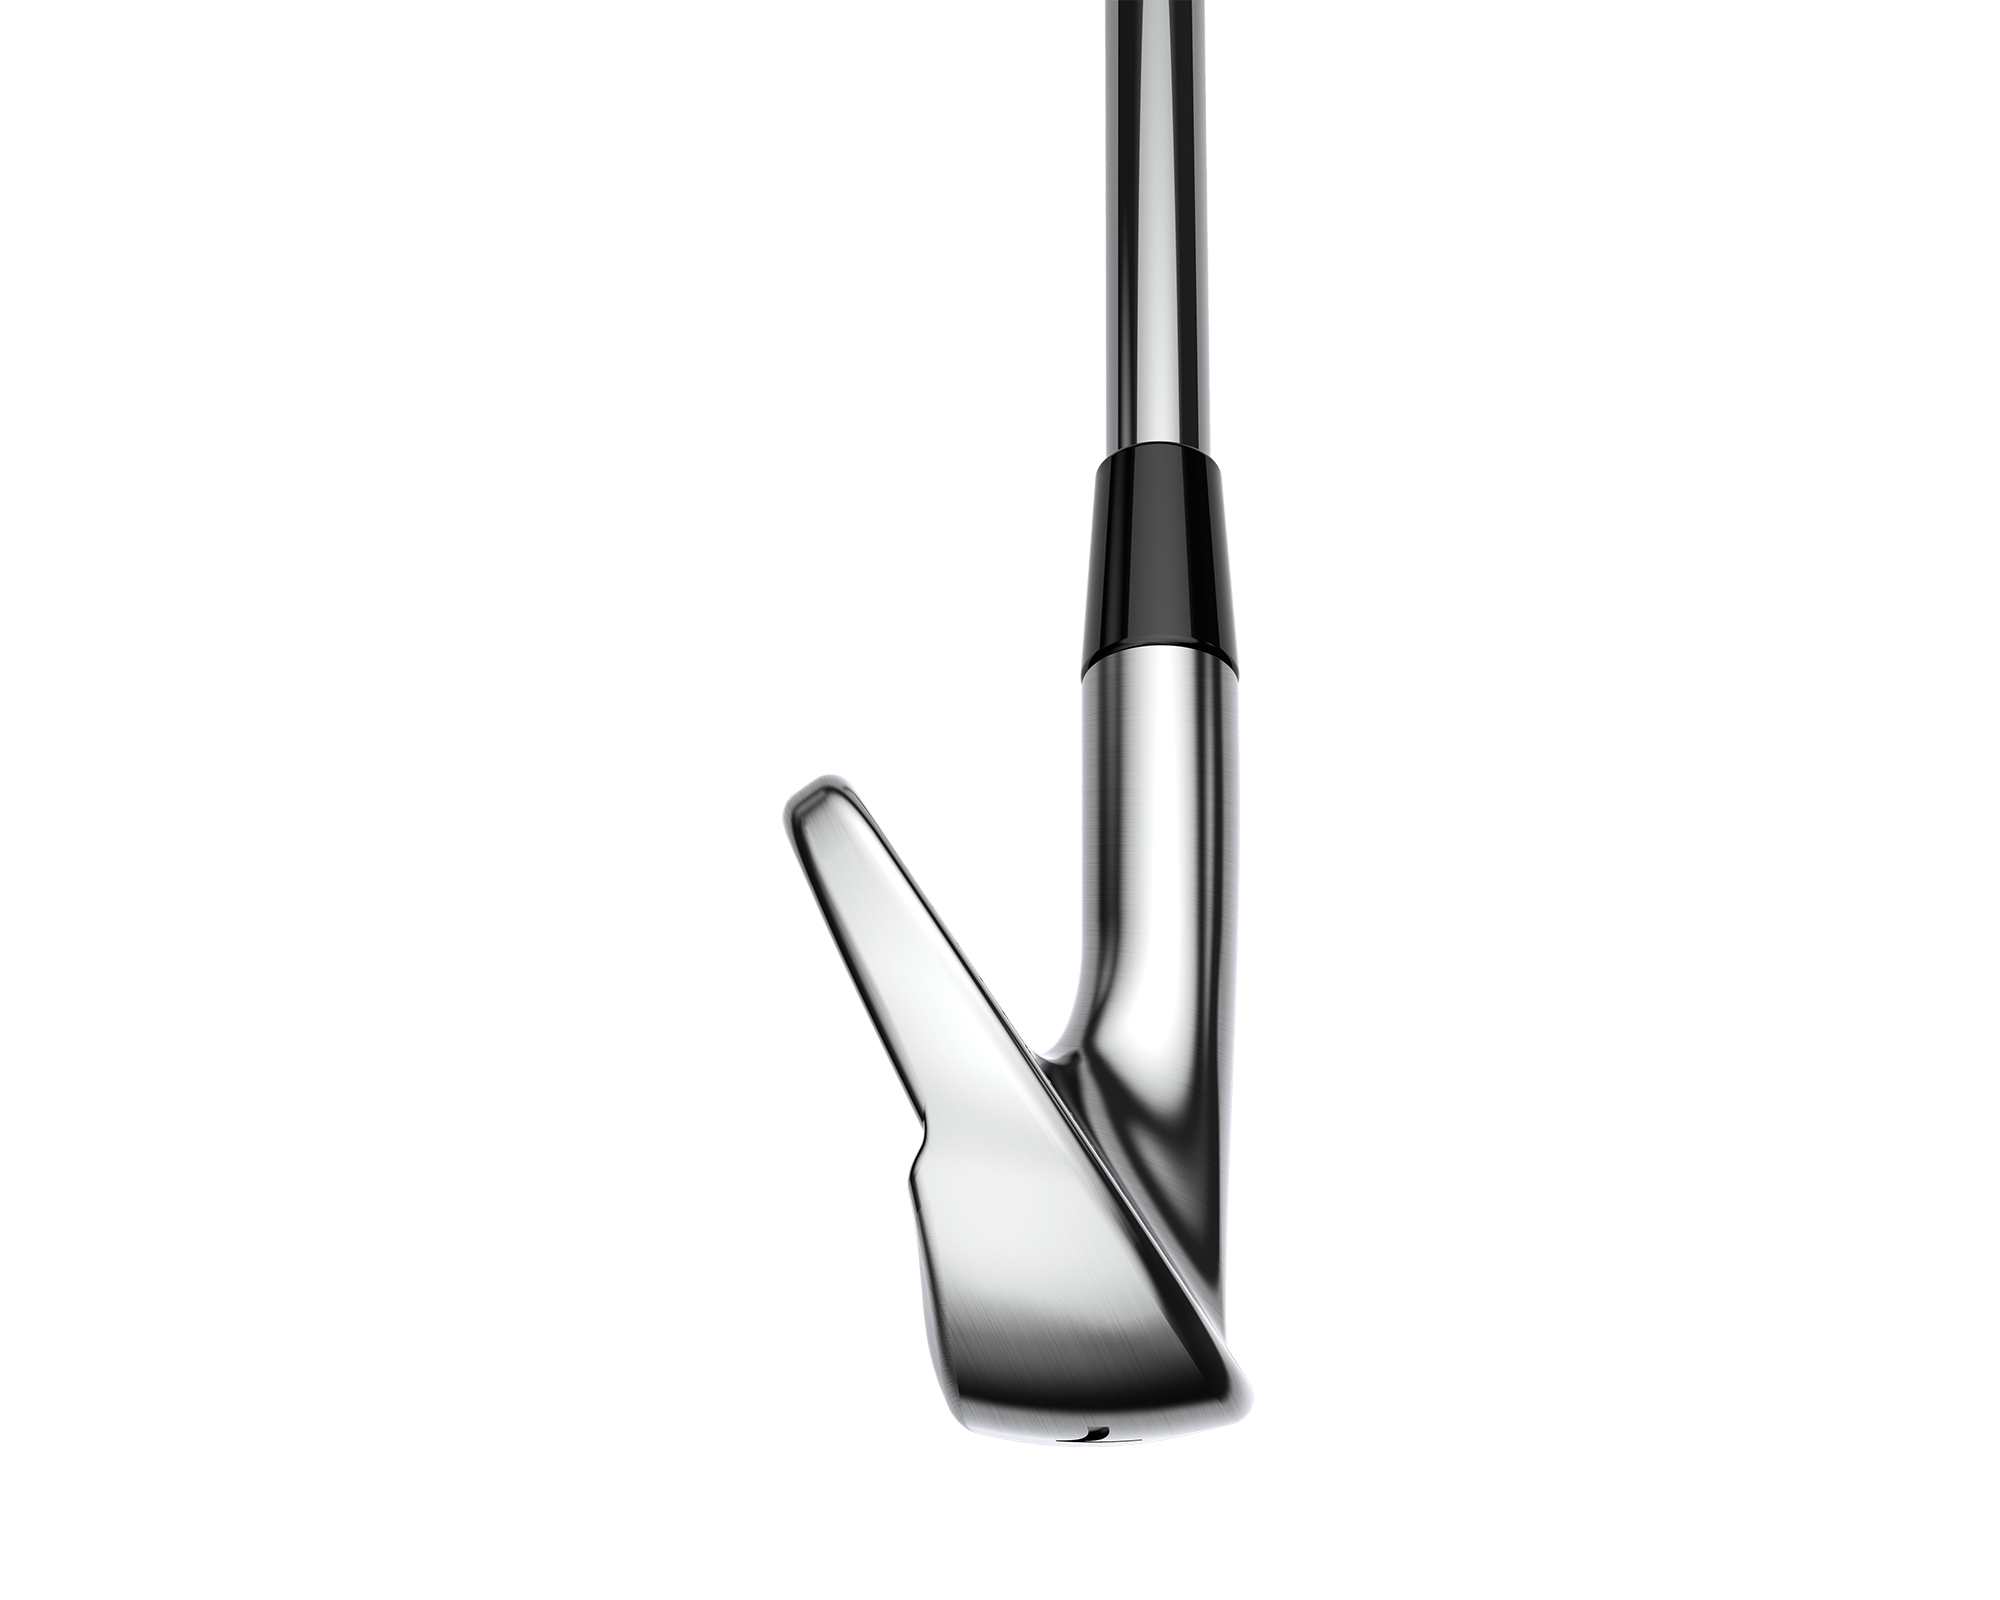 Cobra King CB/MB Irons · Right handed · Steel · Stiff · 4-PW